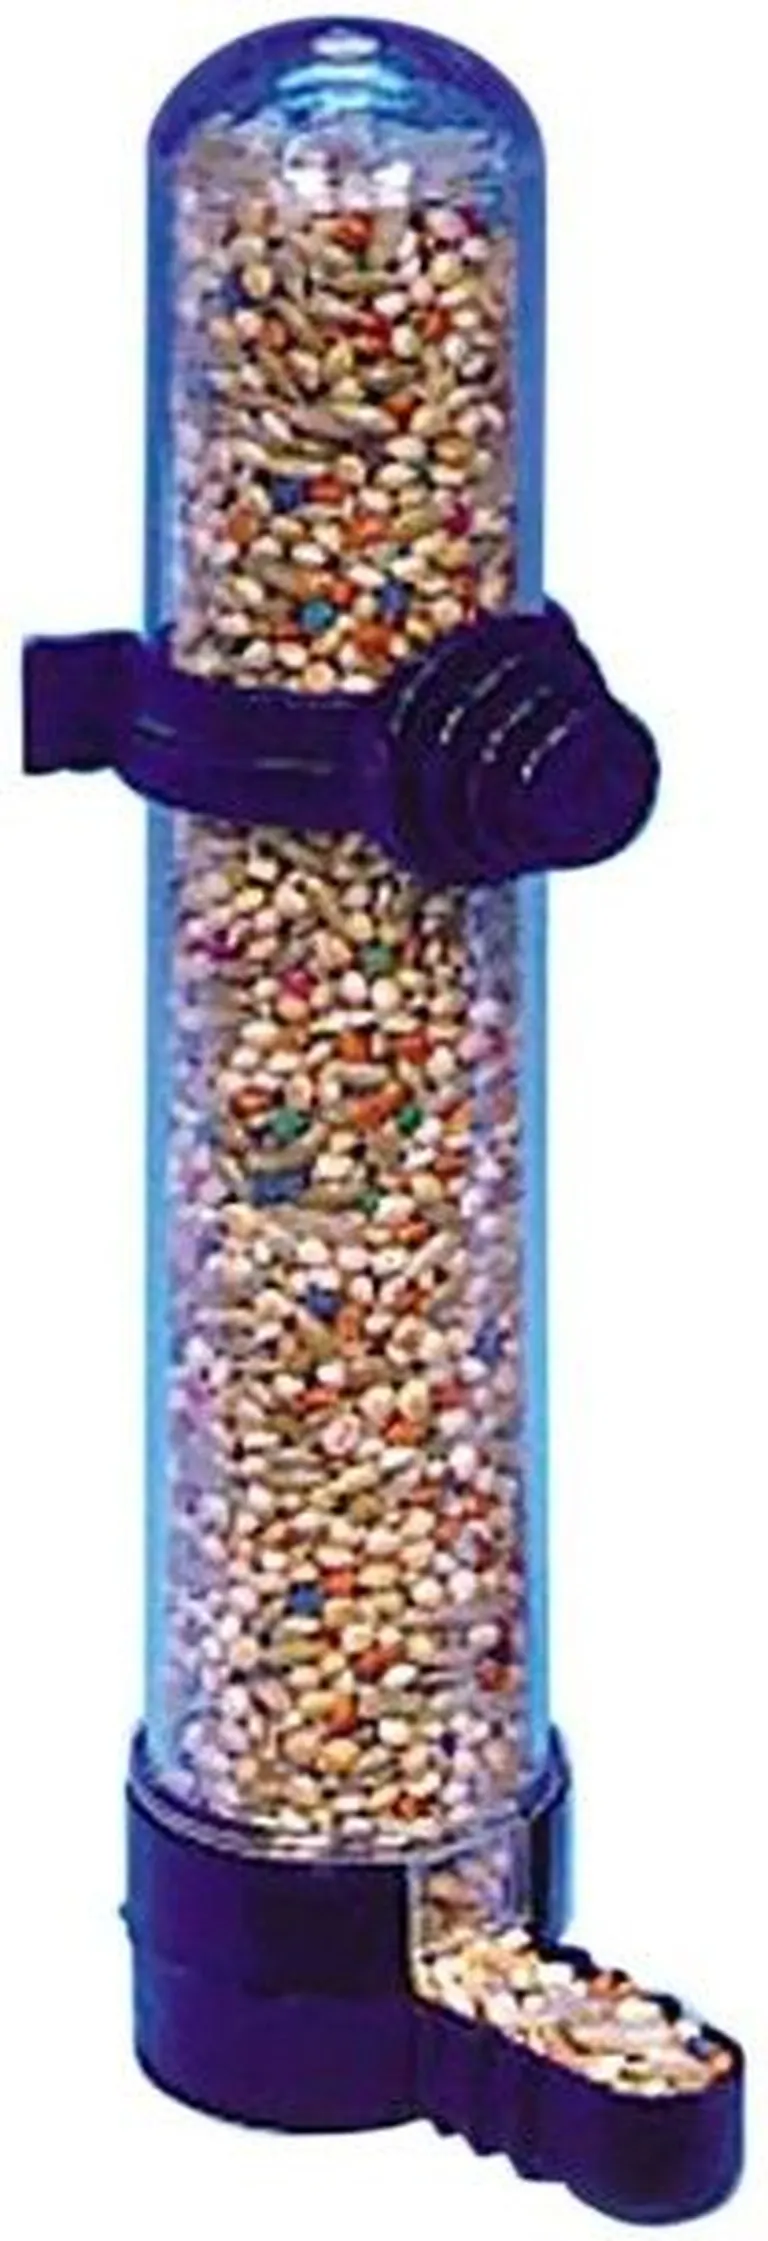 Penn Plax Seed or Water Tube for Small Birds Photo 1